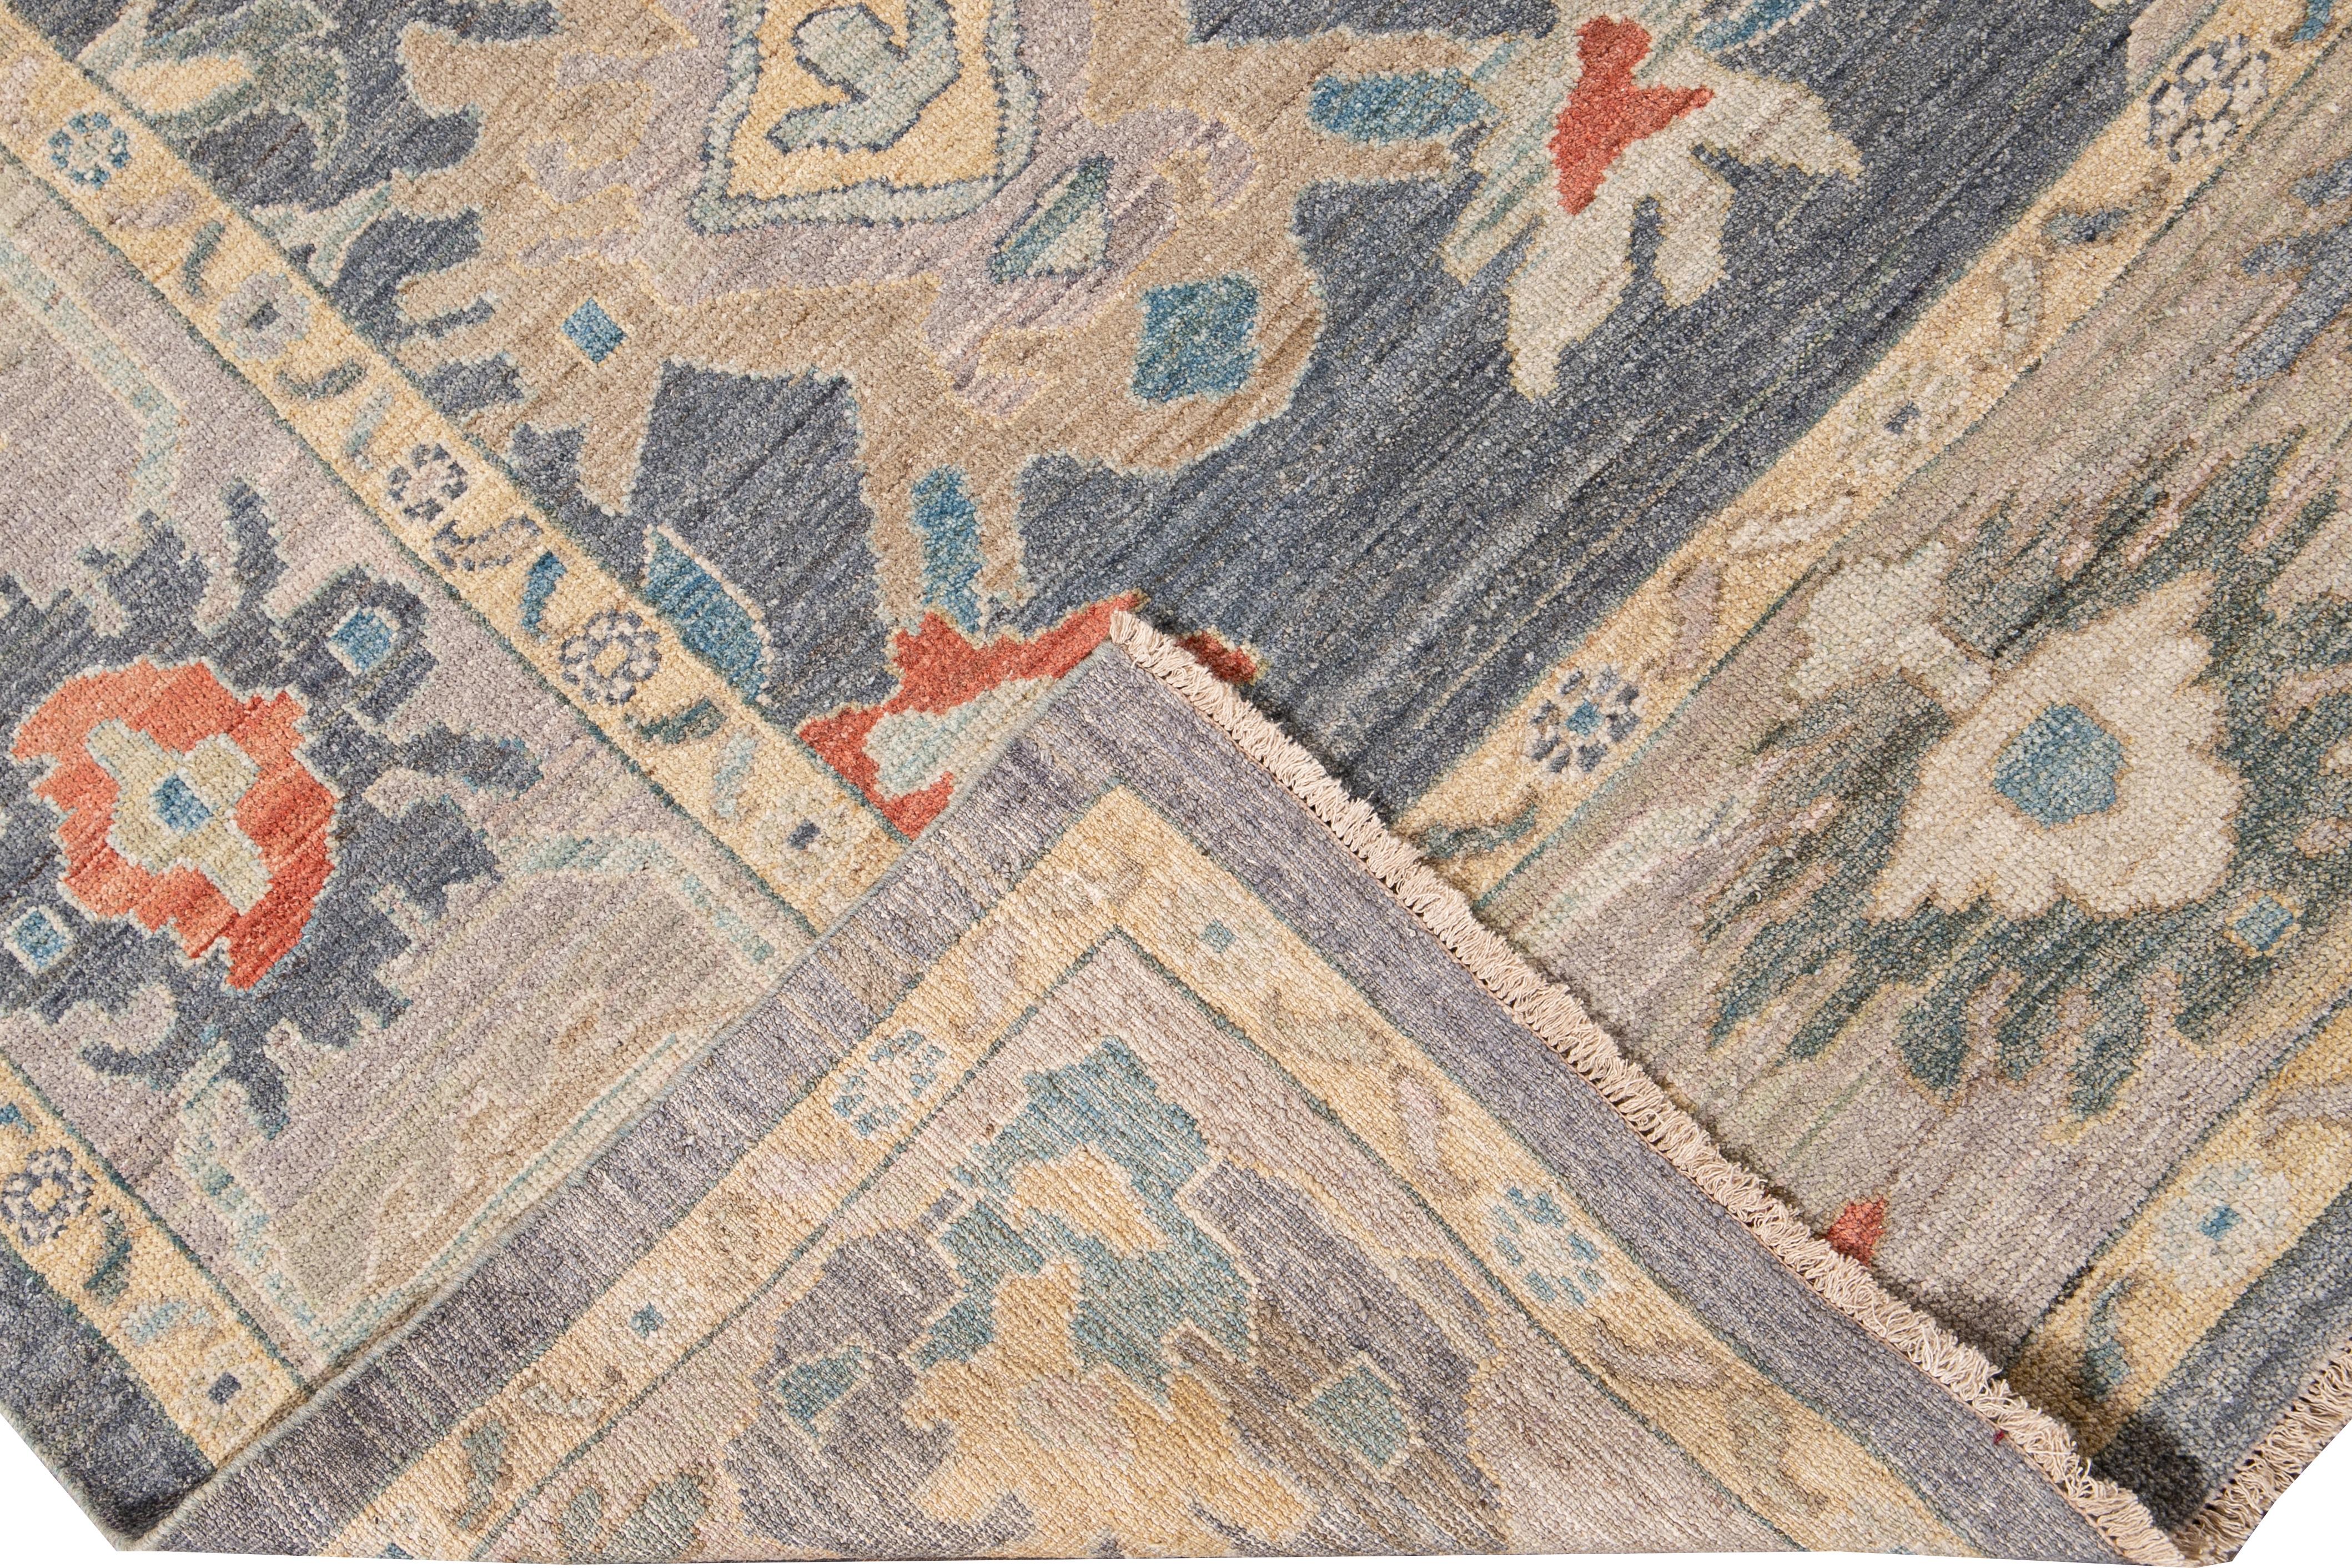 Beautiful modern Sultanabad hand-knotted wool rug with a gray field. This Sultanabad rug has yellow, blue, green, and orange accents in a gorgeous all-over geometric floral design.

This rug measures: 10'3